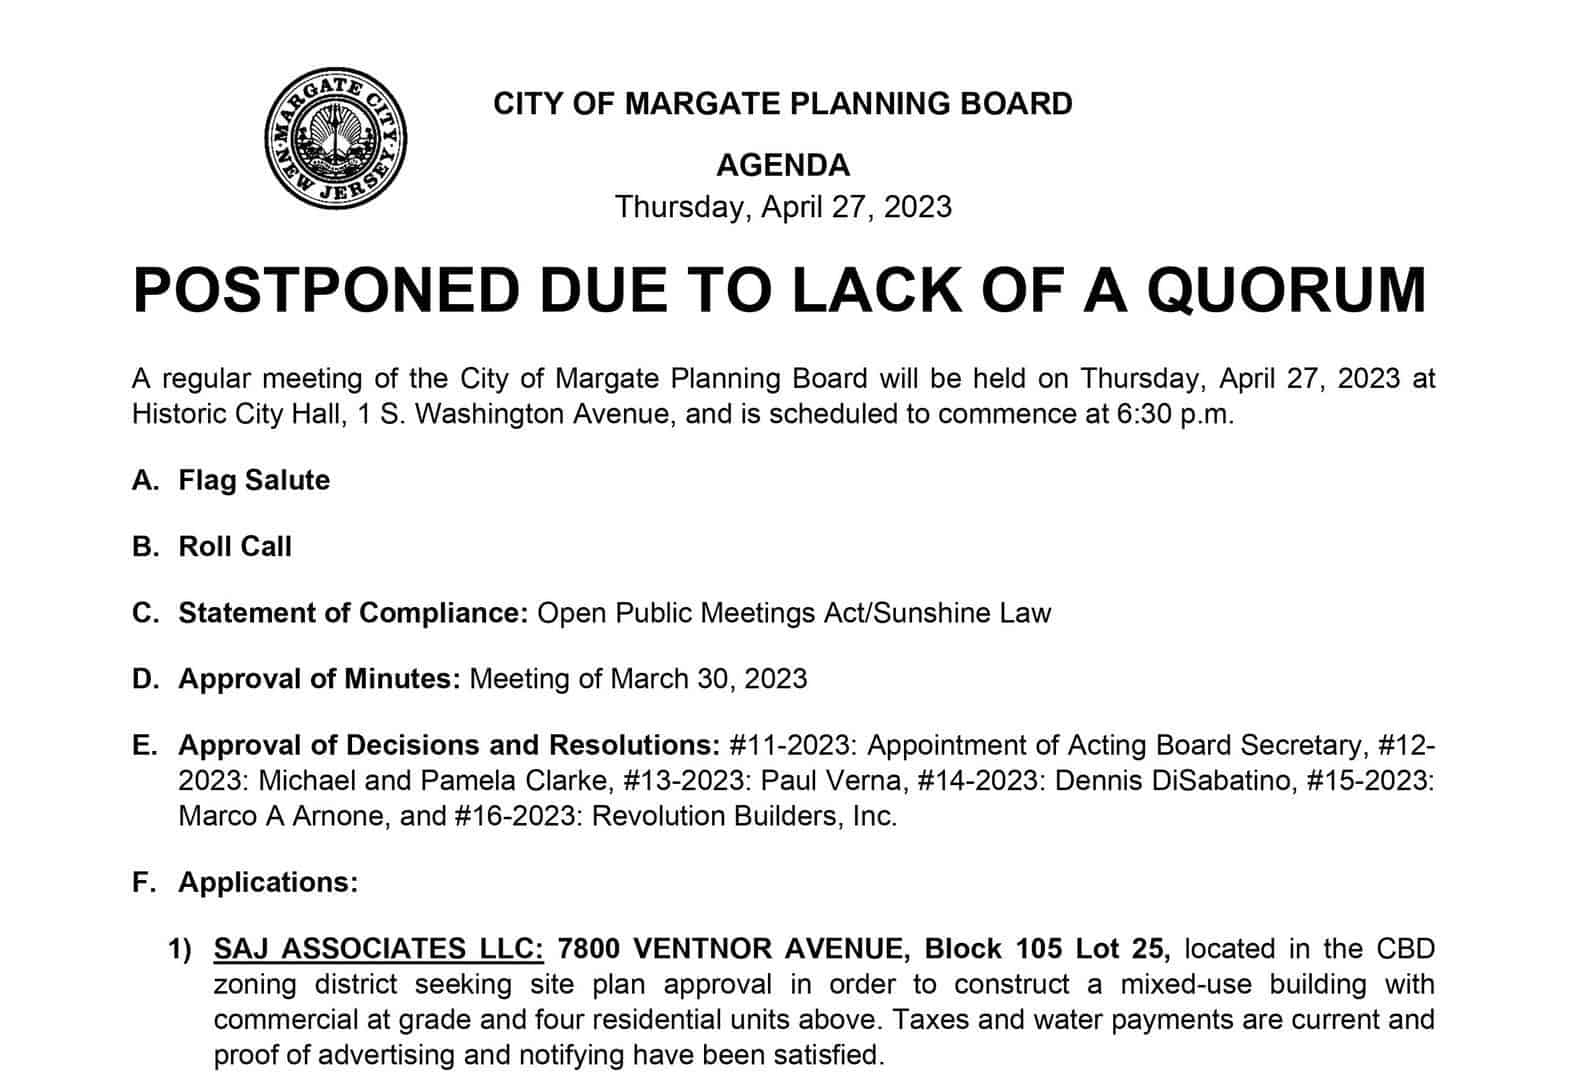 Margate Planning Board Accused of Spot Zoning 3 Margate Planning Board Accused of Spot Zoning